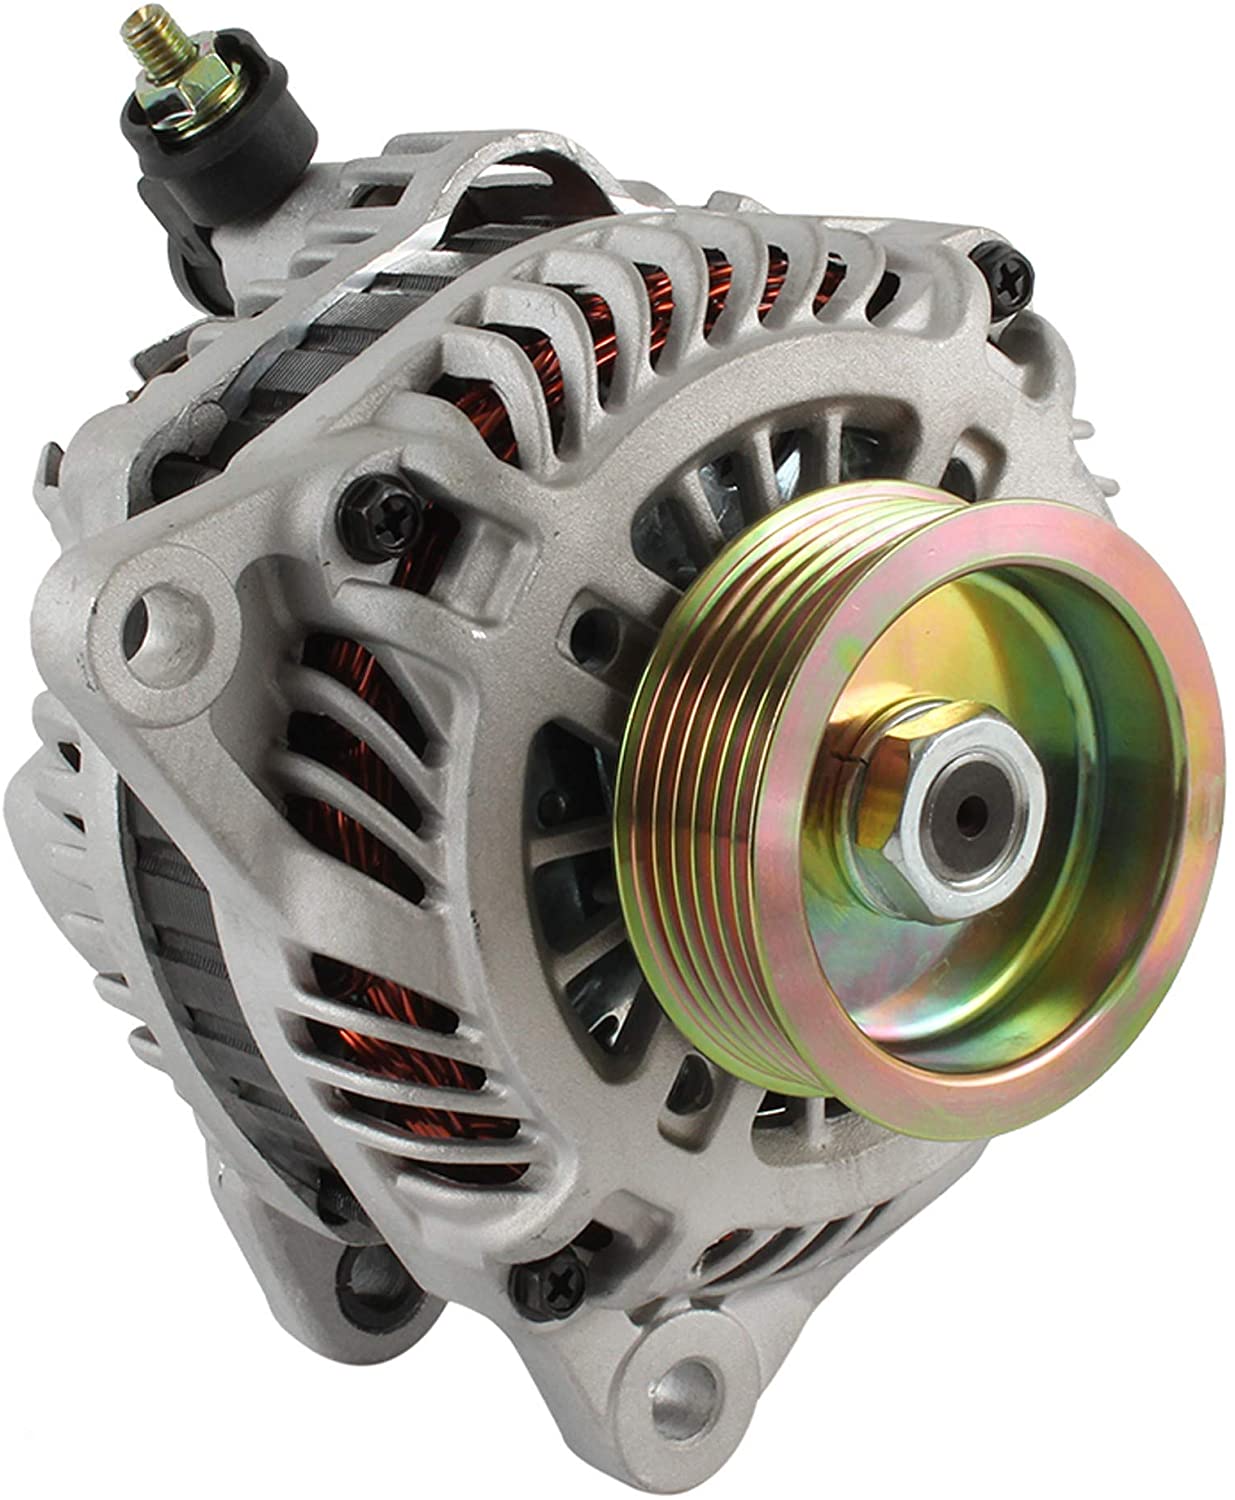 DB Electrical AMT0146 New Alternator Compatible with/Replacement for Mitsubishi 2.4L 2.4 Lancer, Outlander 04 05 06 2004 2005 2006 A3TG1192 A3TG3491 113782 1800A064 MN183450 1-2816-01MI 11055